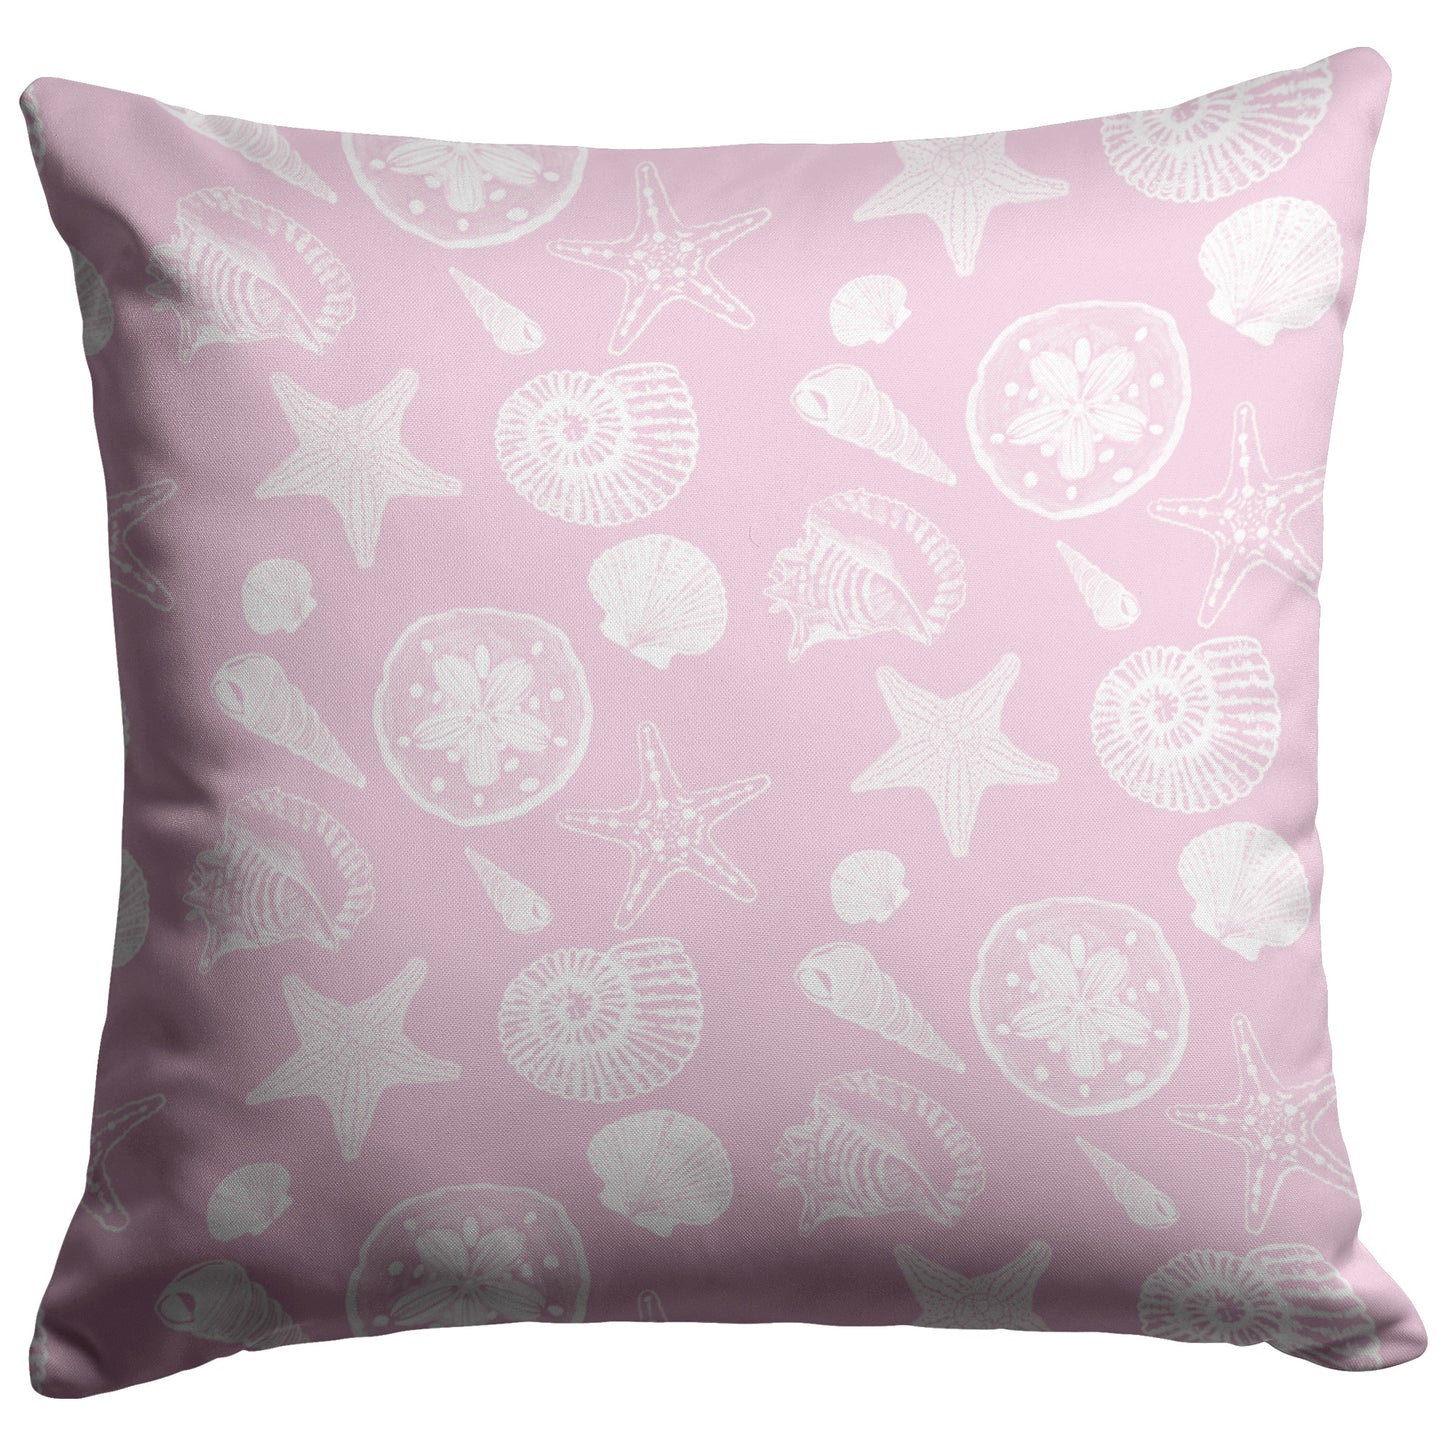 Seashell Sketches on Pink Background, Throw Pillow